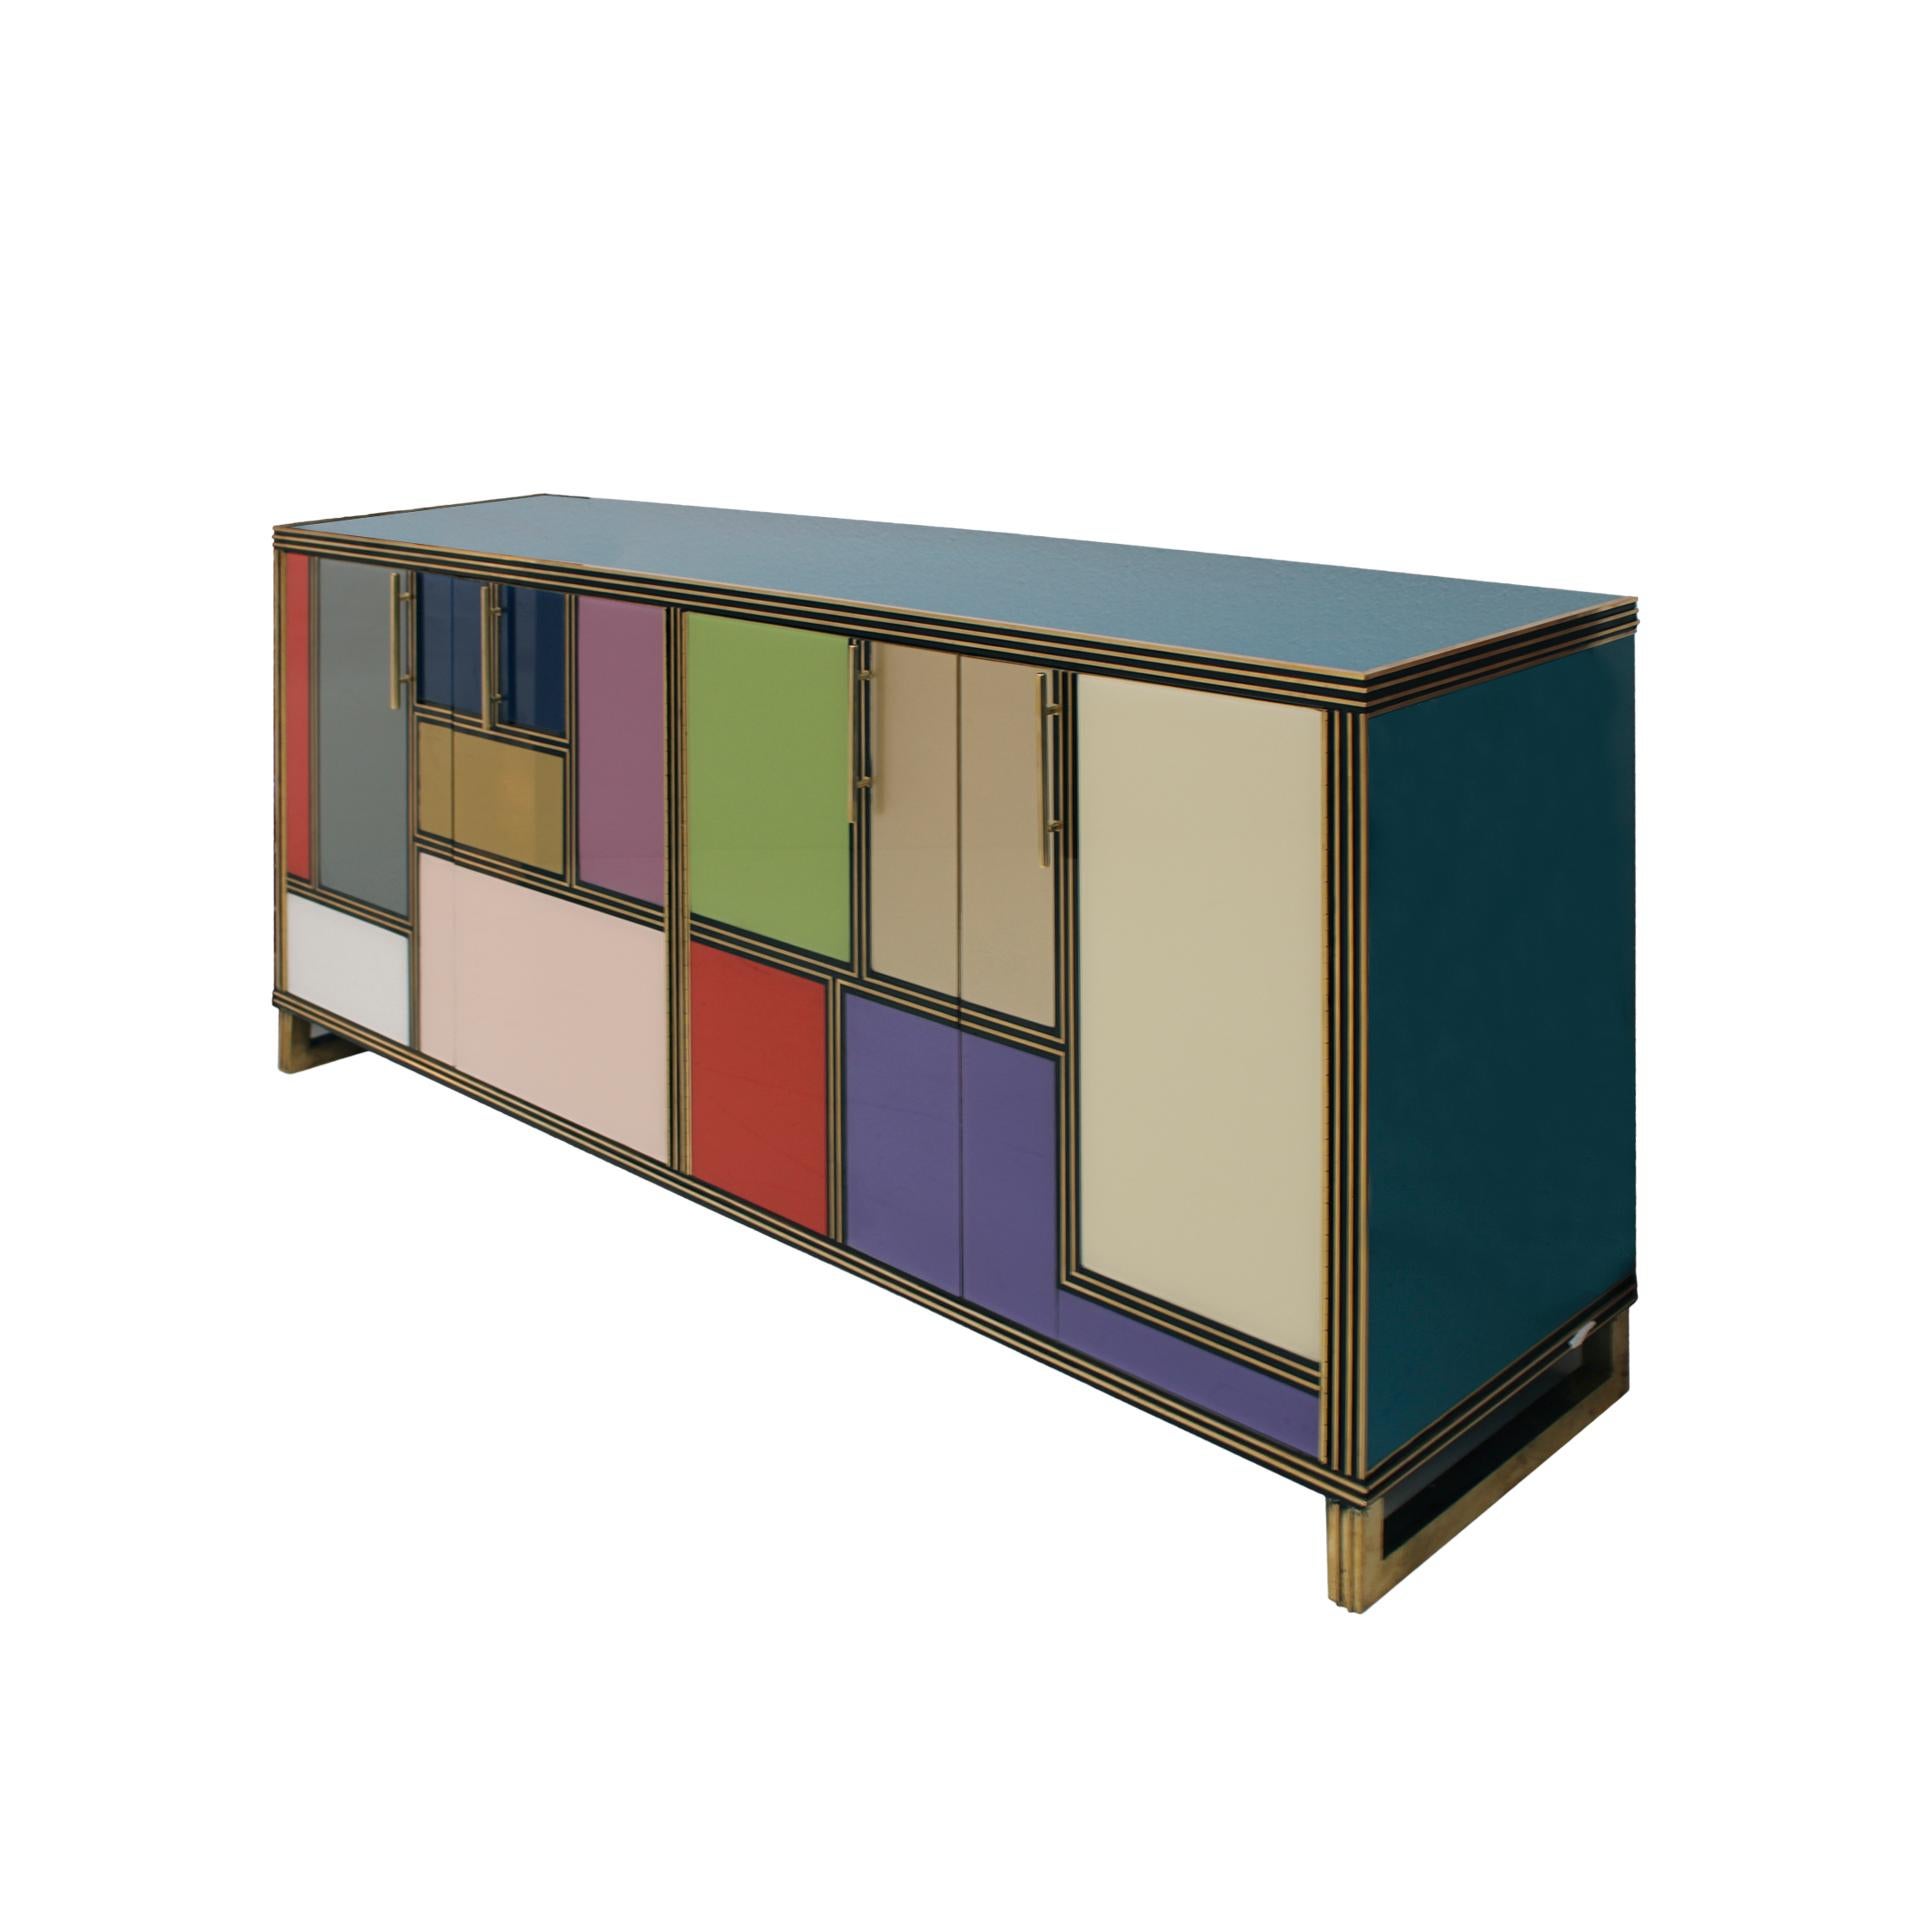 Italian sideboard composed of four folding doors and one shelf inside. Original wood structure from the 50´s covered in colored glass and brass profiles, handles and legs. Italian manufacture.

Production can last between 5 and 6 weeks.

Our main